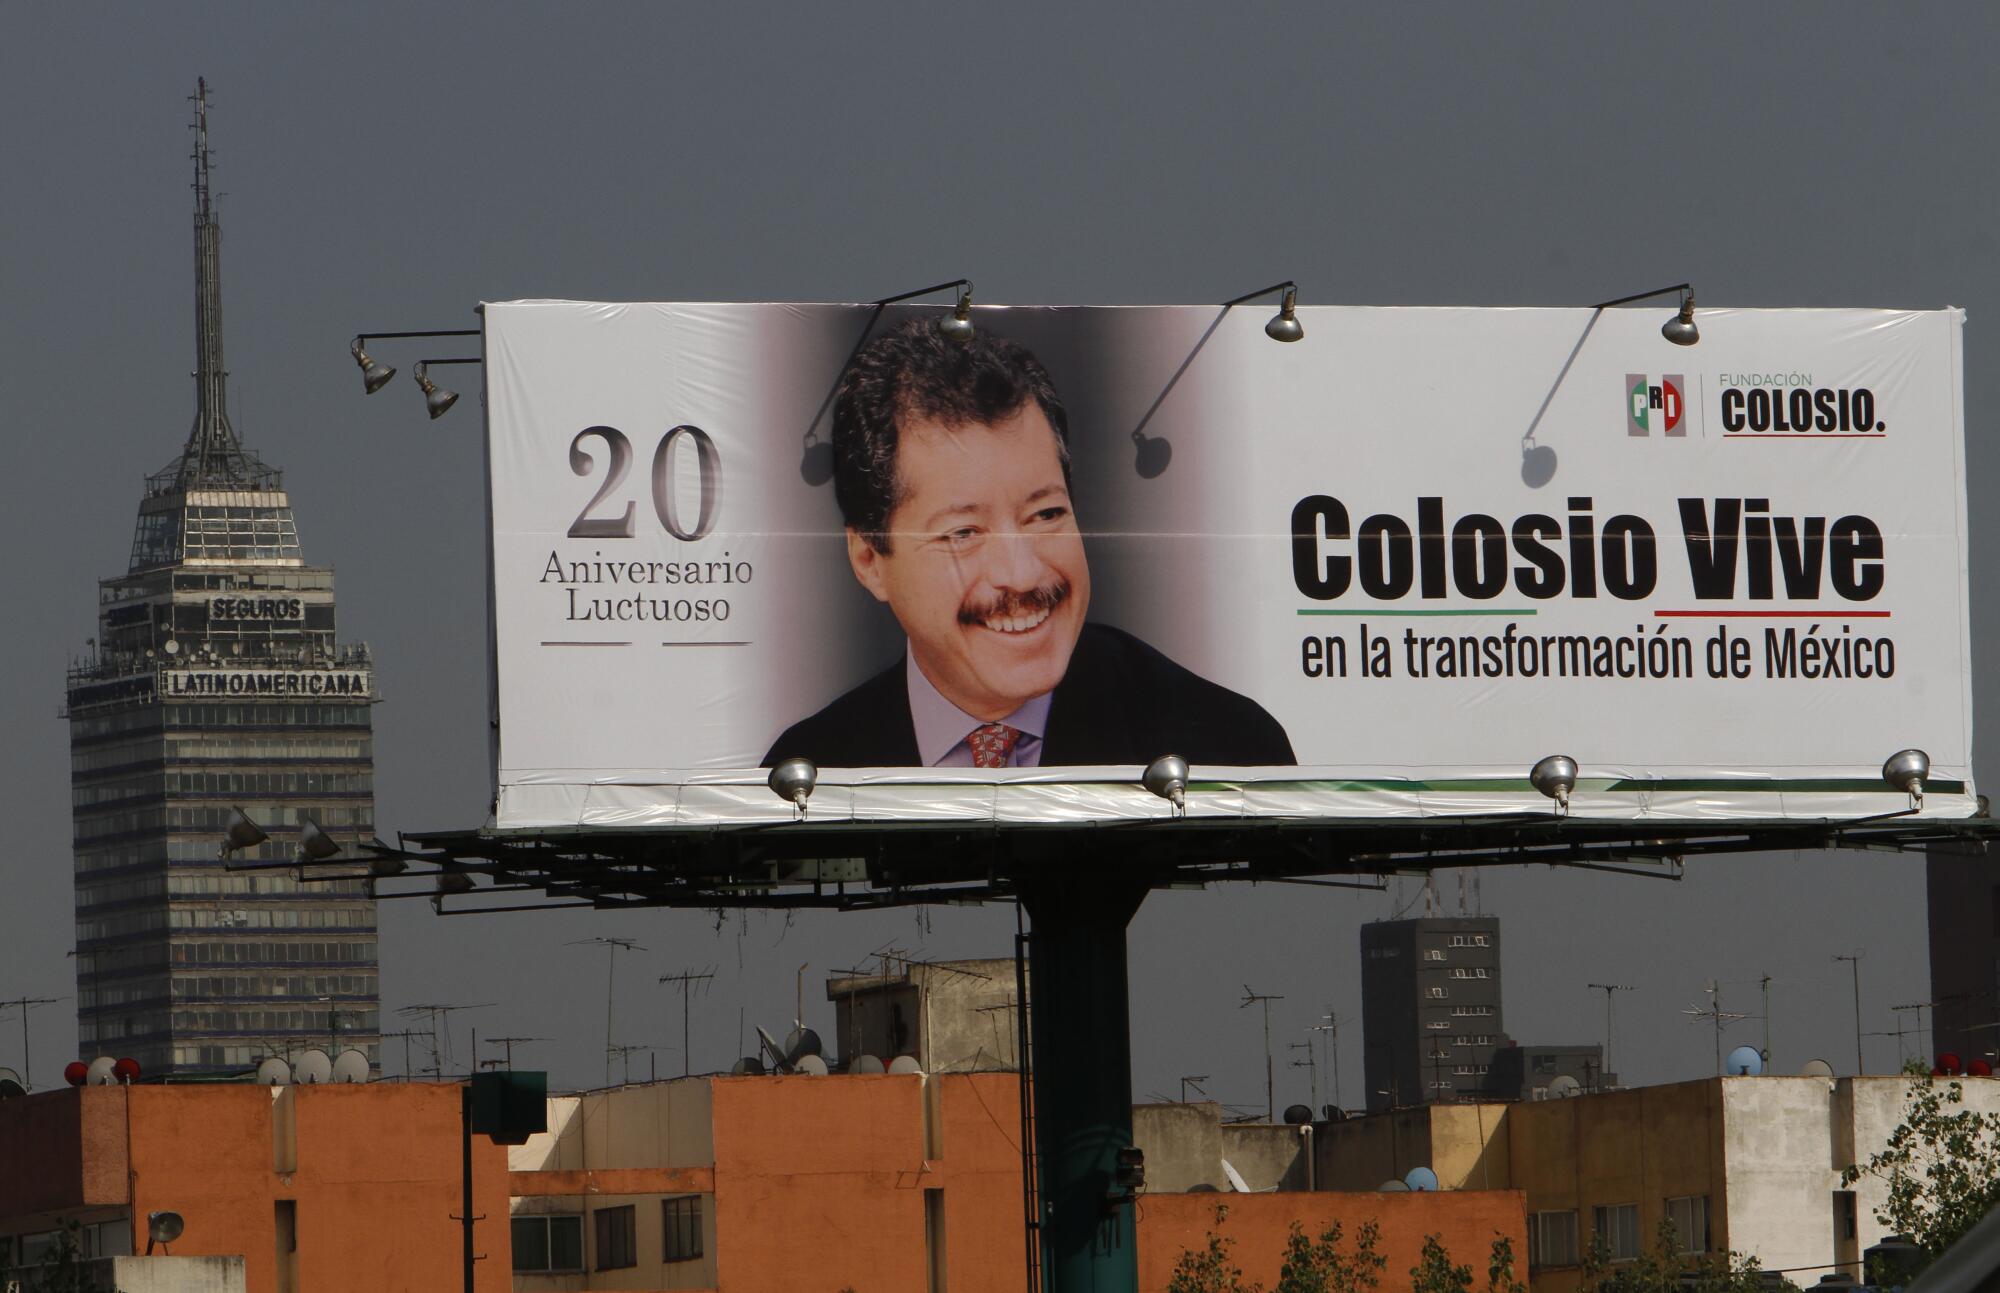 Billboard with image of slain Mexican presidential candidate Luis Donaldo Colosio